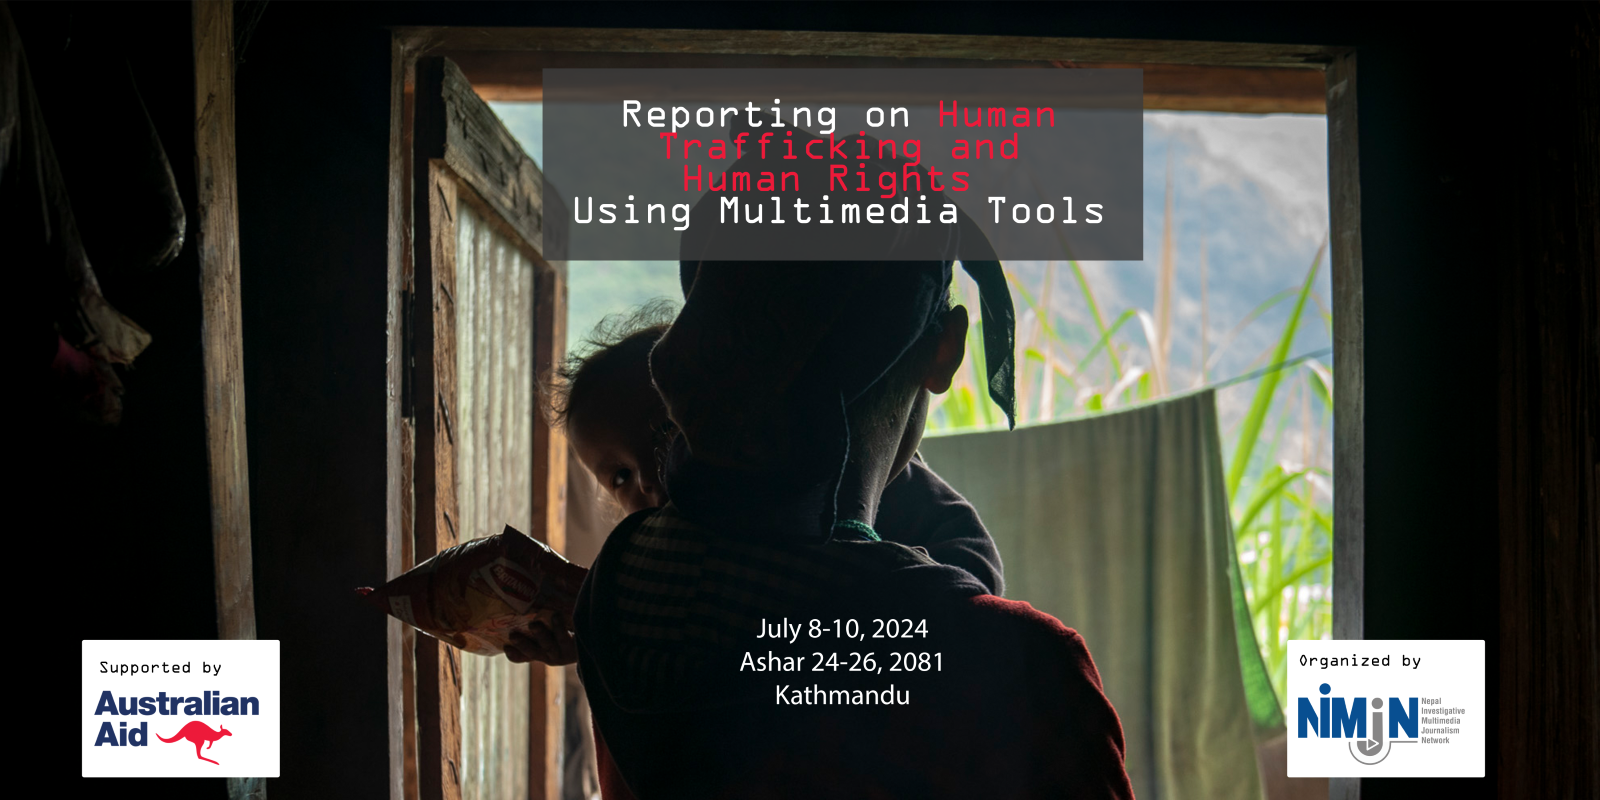 Training on Reporting on Human Trafficking and Human Rights Using Multimedia Tools in Bagmati Province